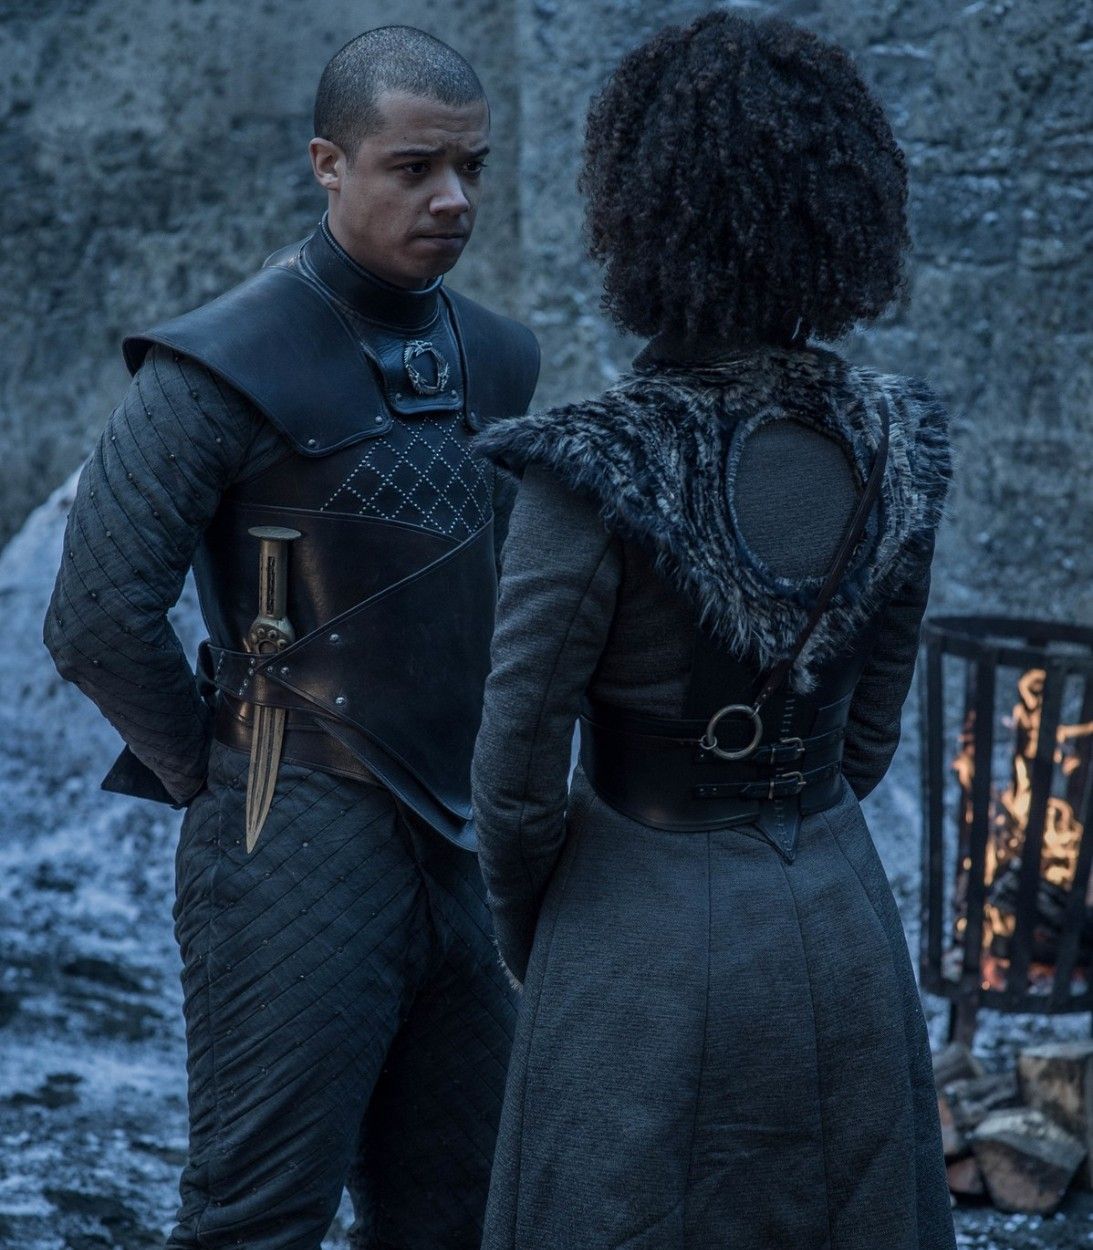 Grey Worm and Missandei in Game of Thrones Season 8 Episode 2 Vertical